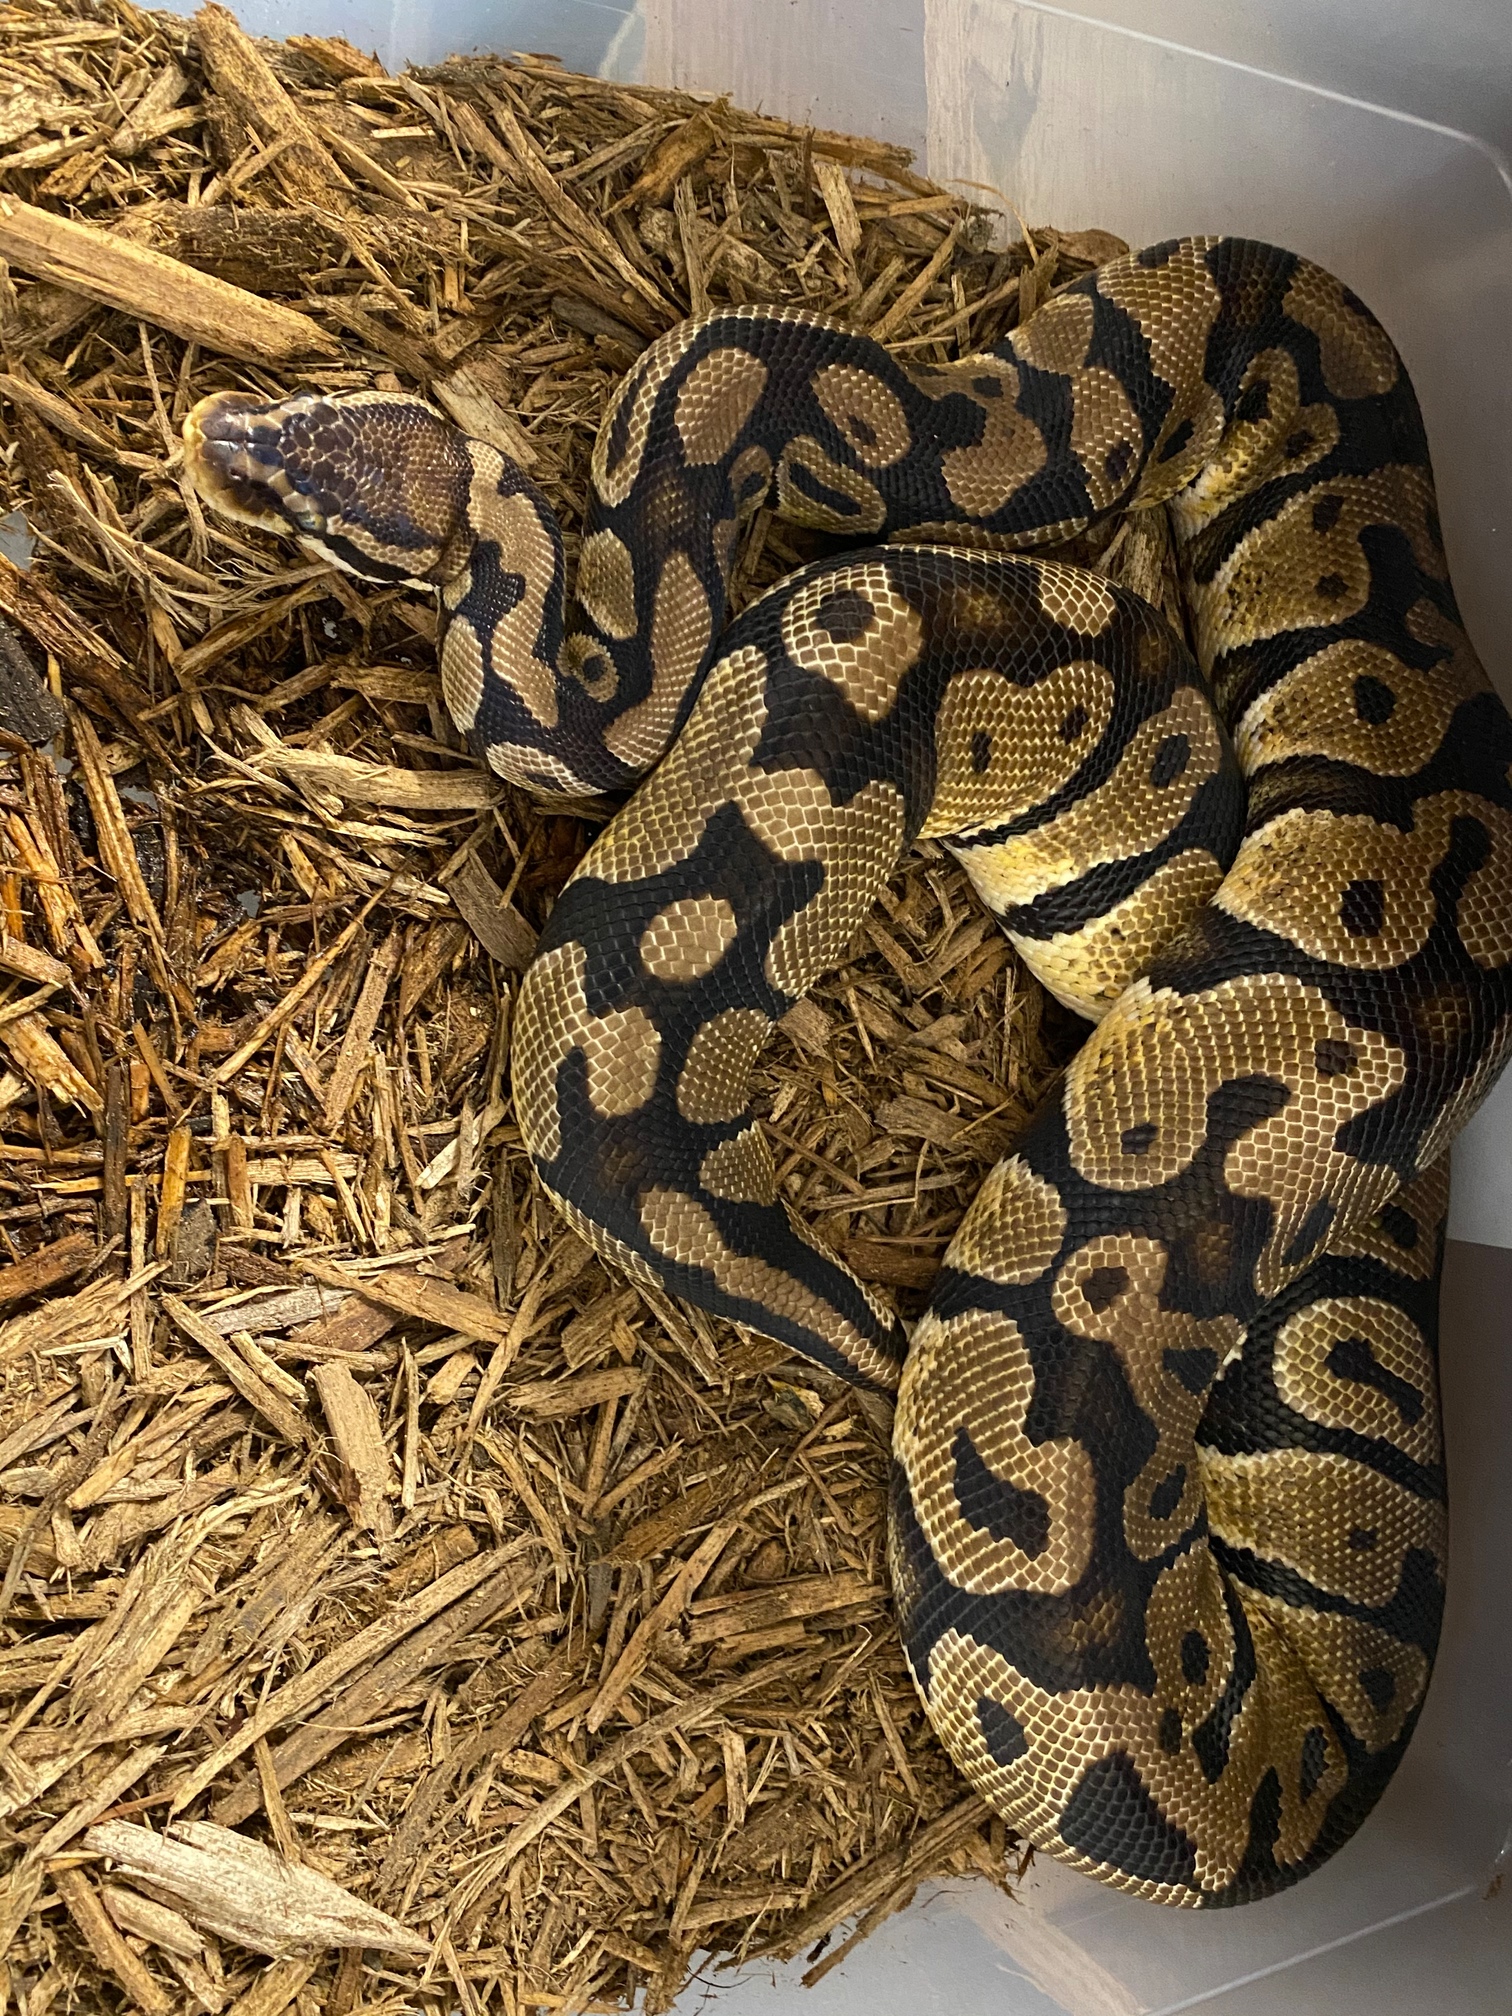 Jungle Woma Ball Python by Trails End Reptiles